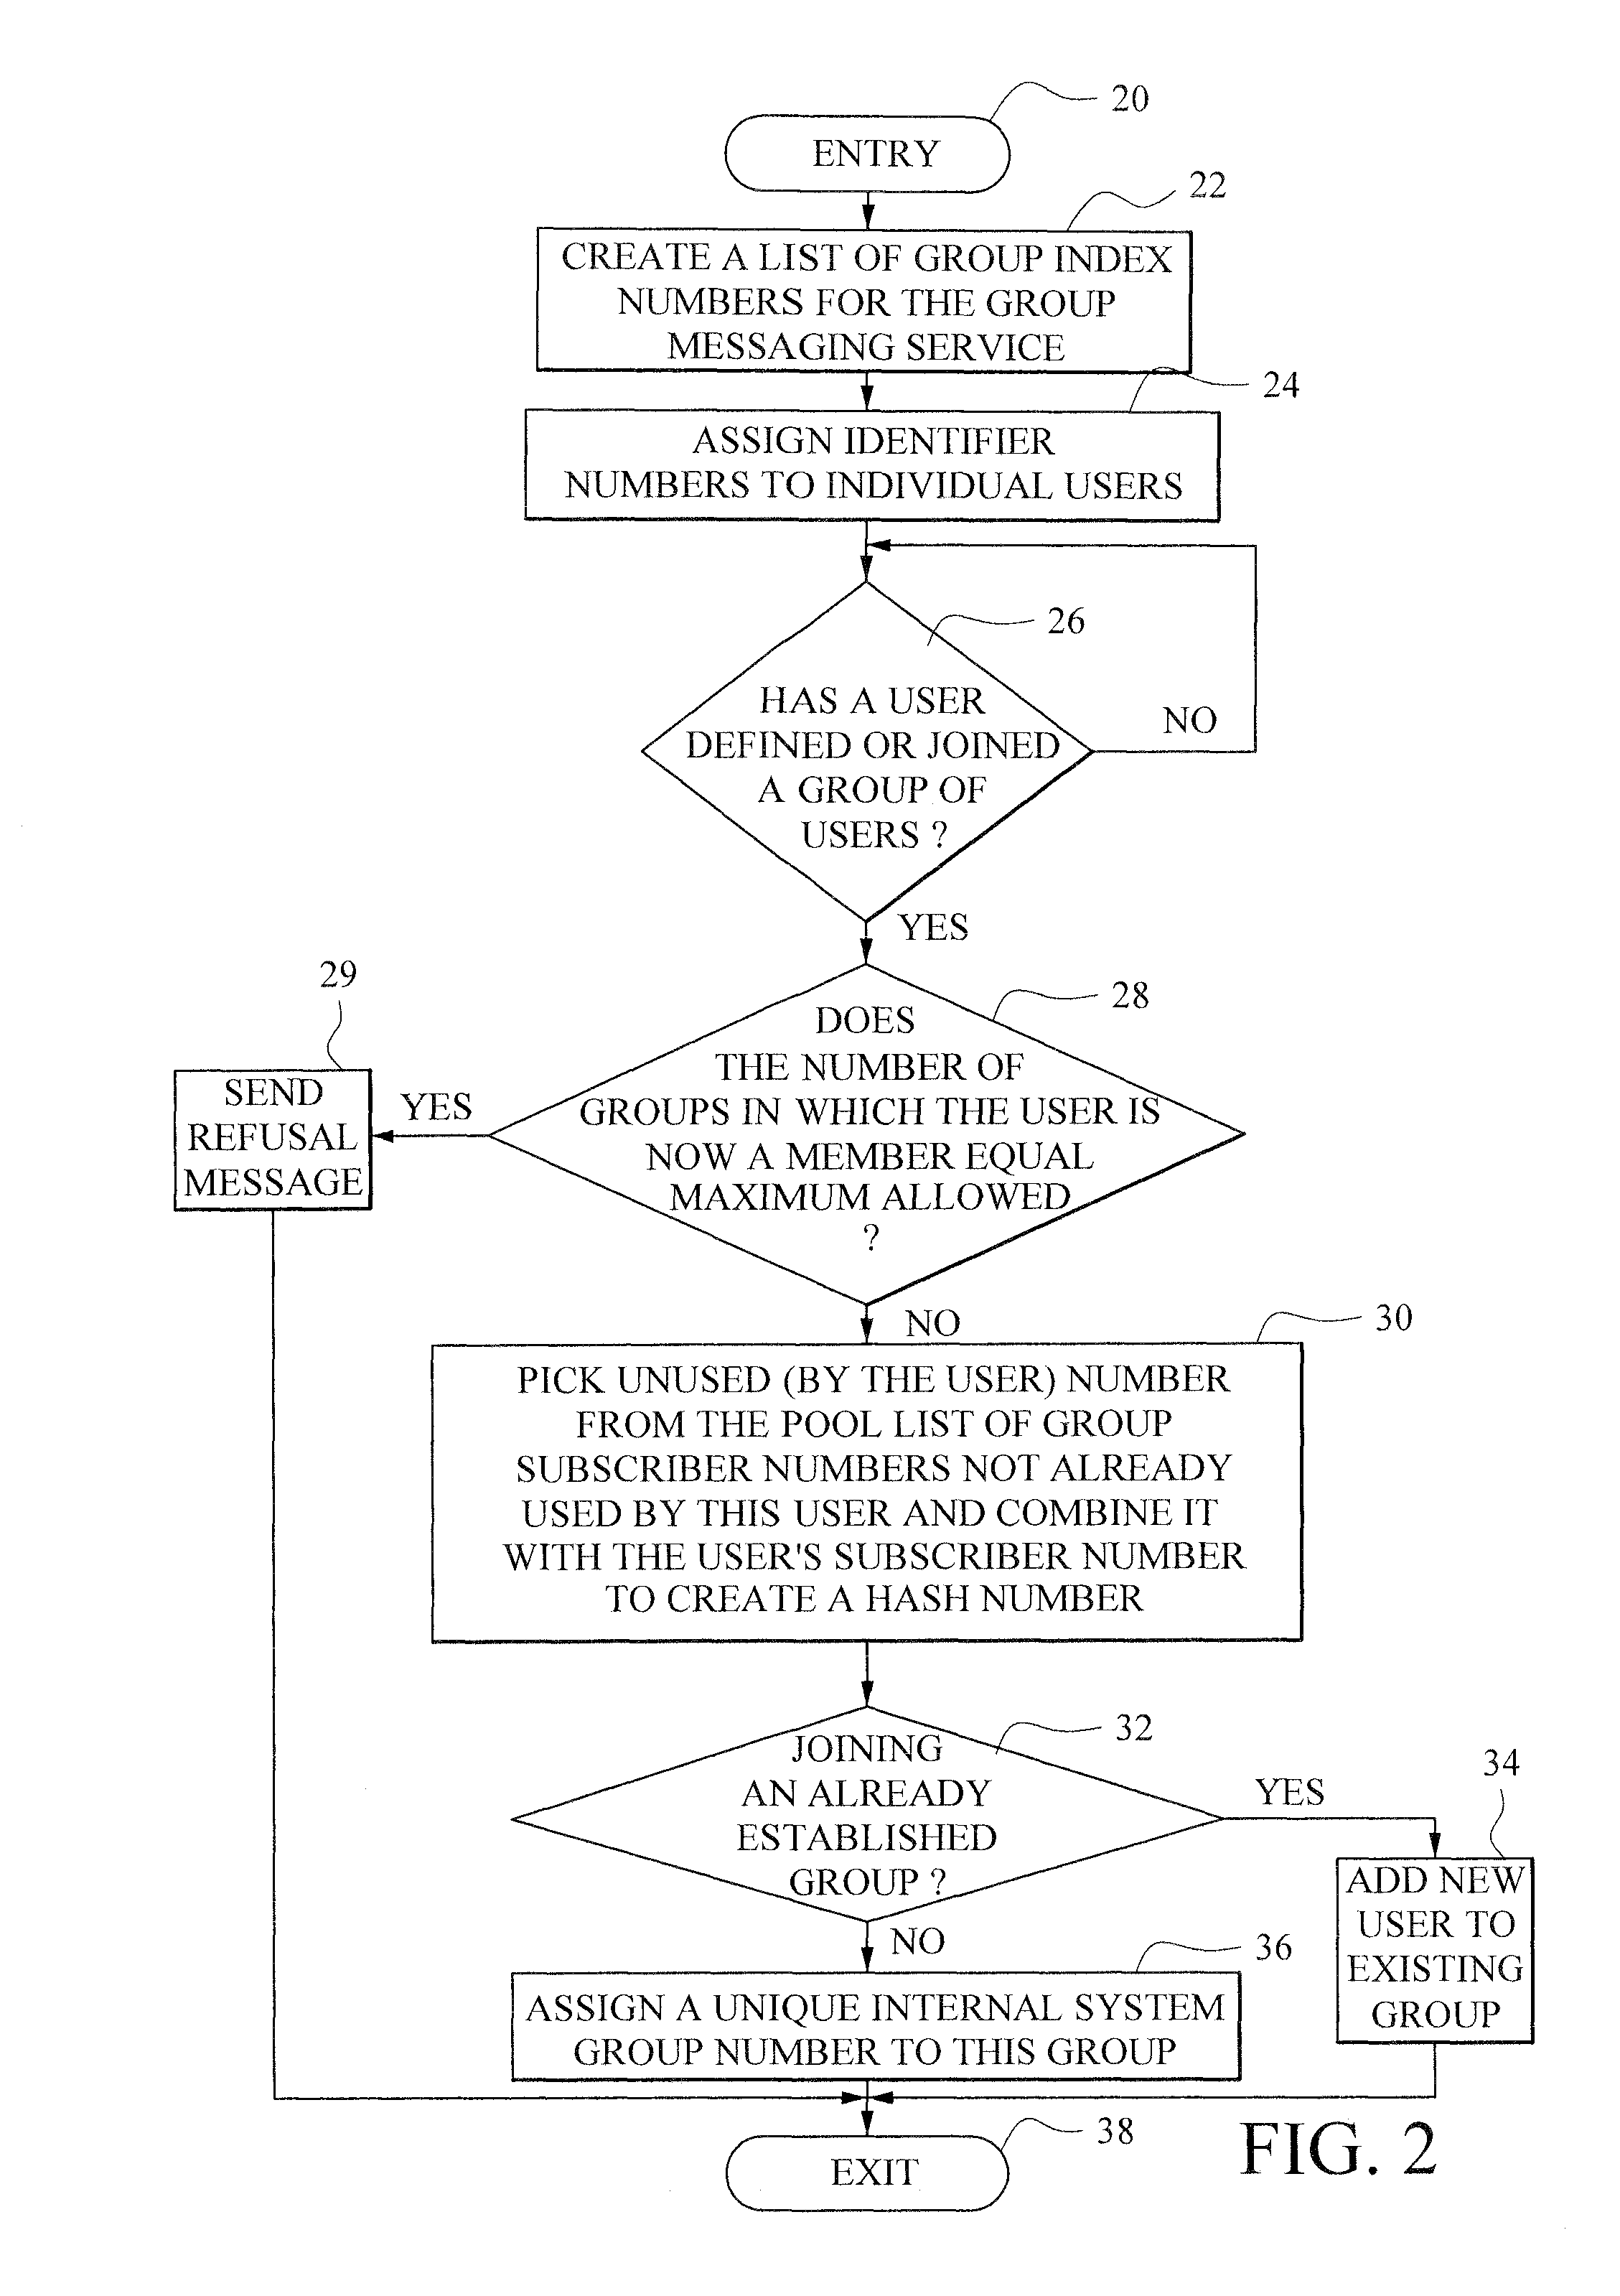 Group subscriber number management system for a group messaging service